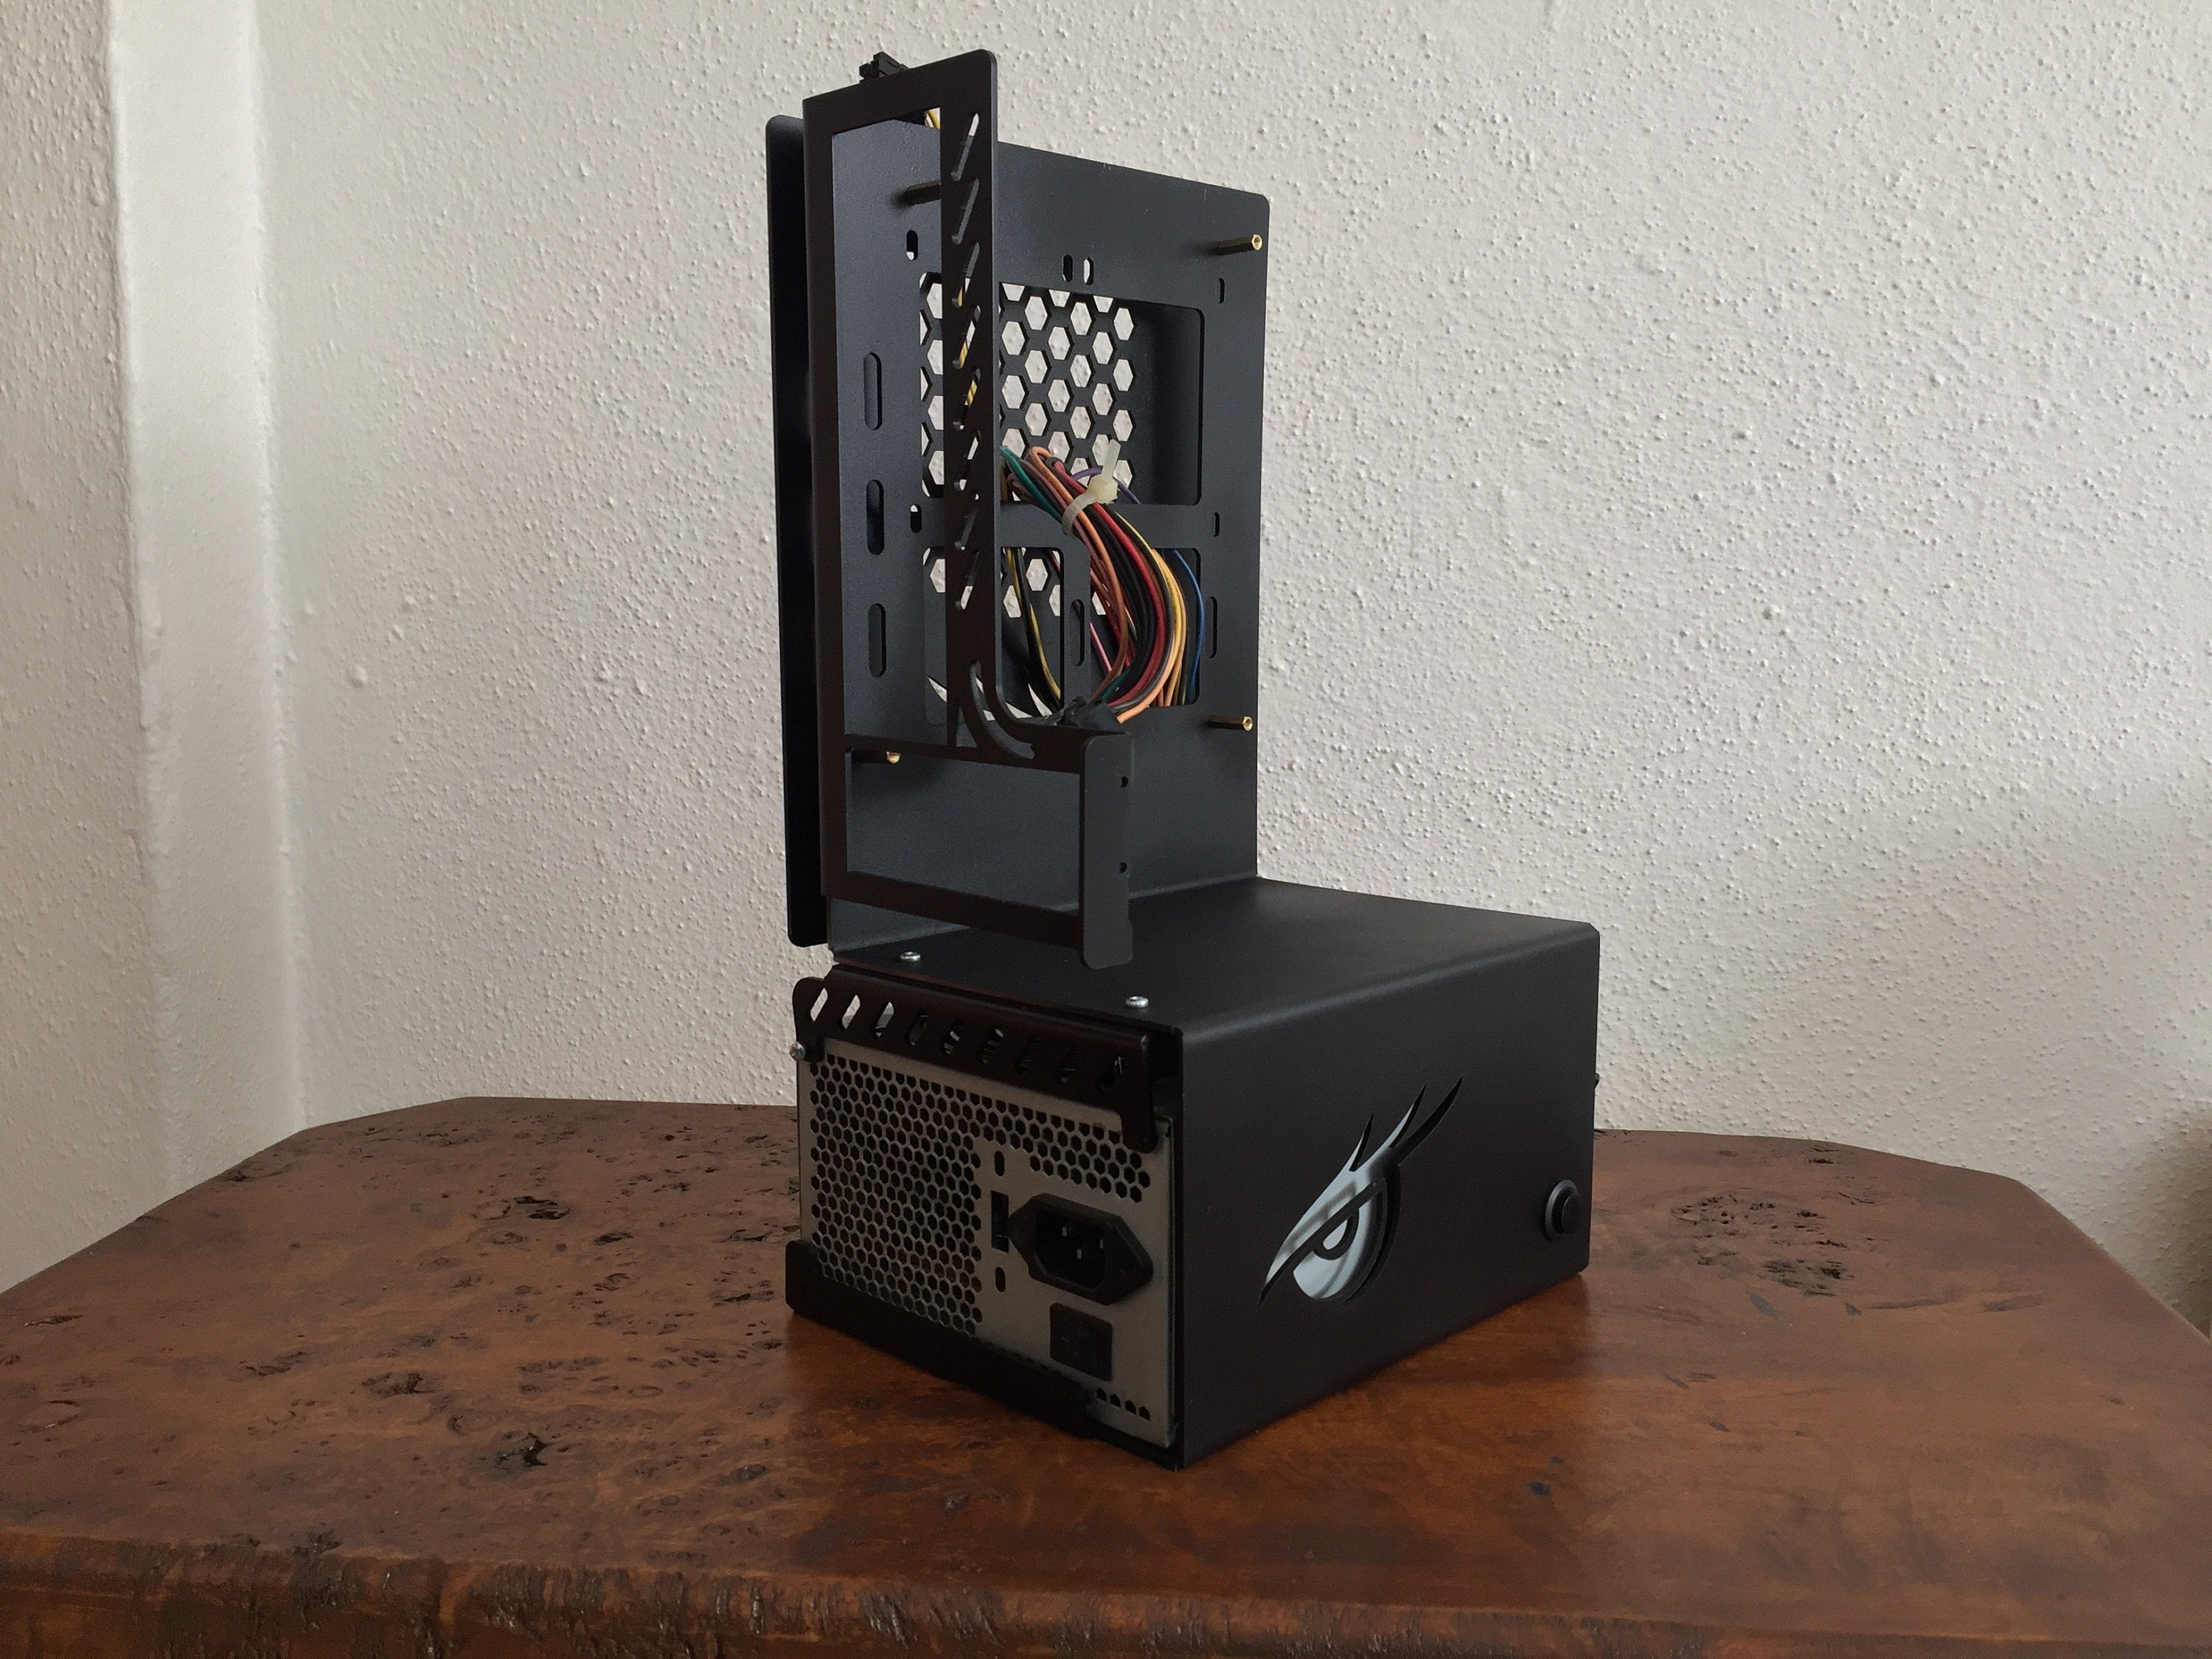 The Ultimate ITX Case?!, Fractal Design Terra Gaming PC Build